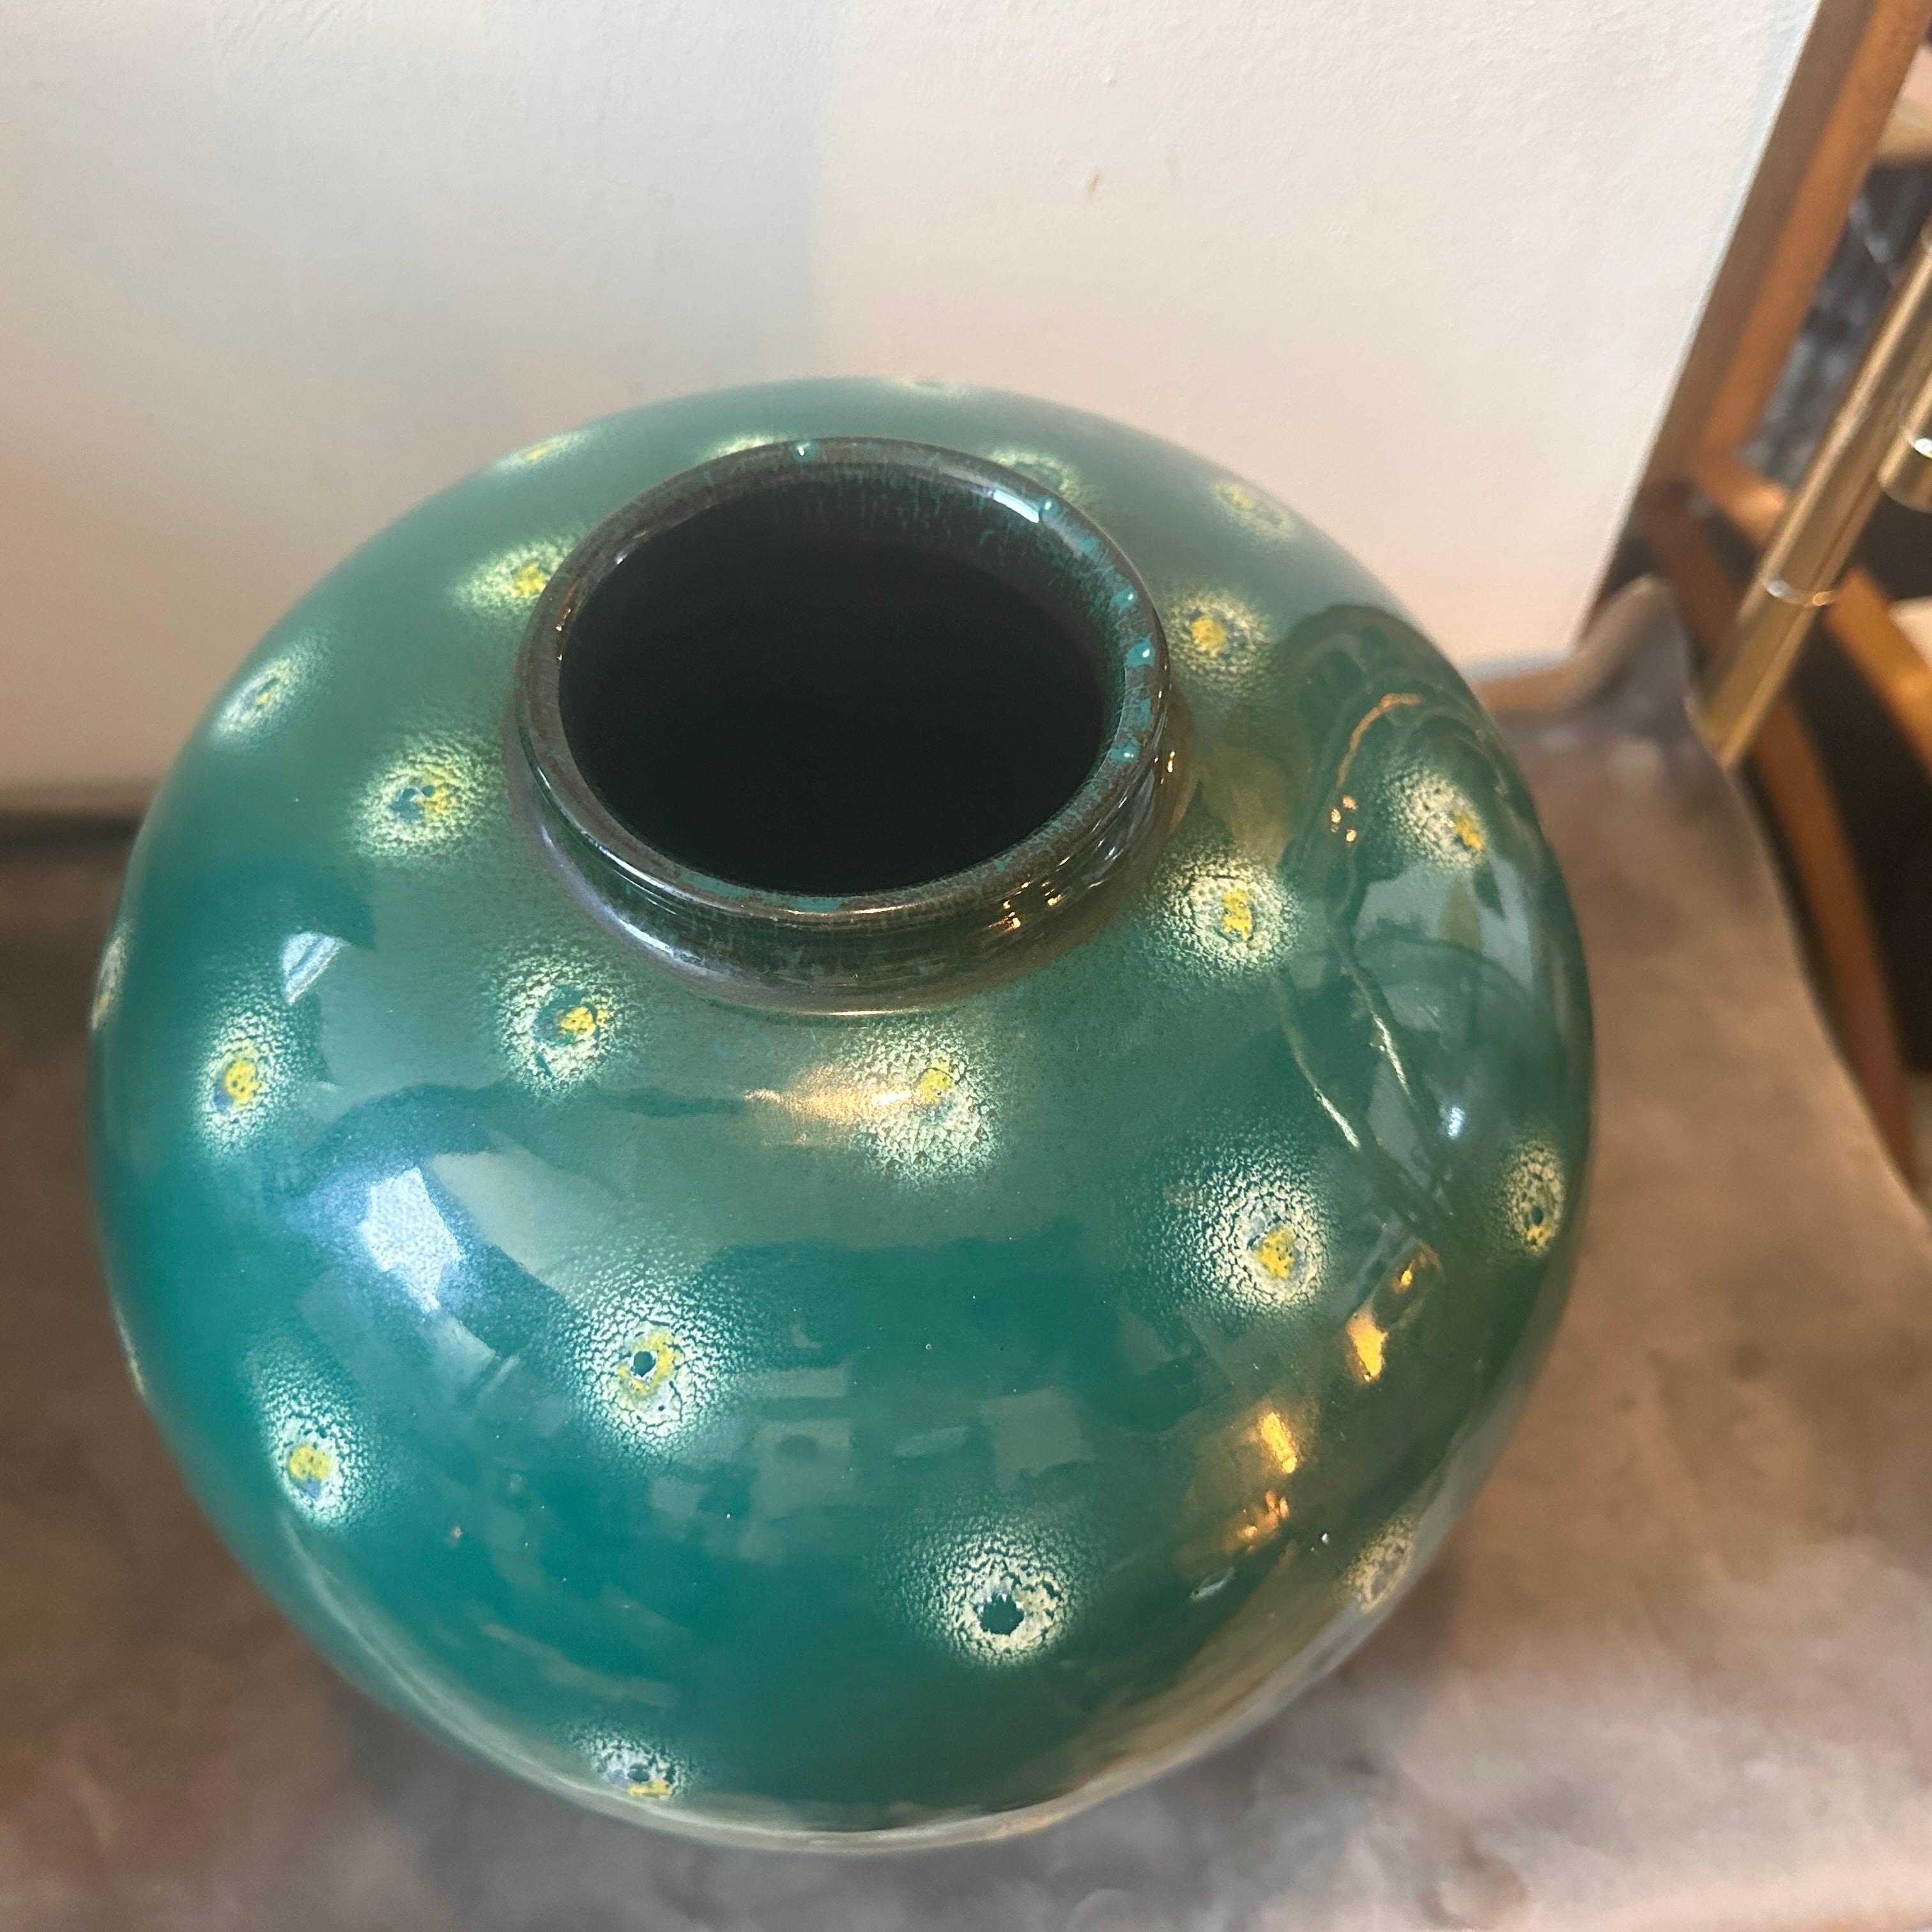 1955 Mid-Century Modern Green Ceramic Sicilian Vase in the Manner of Gio Ponti  For Sale 1